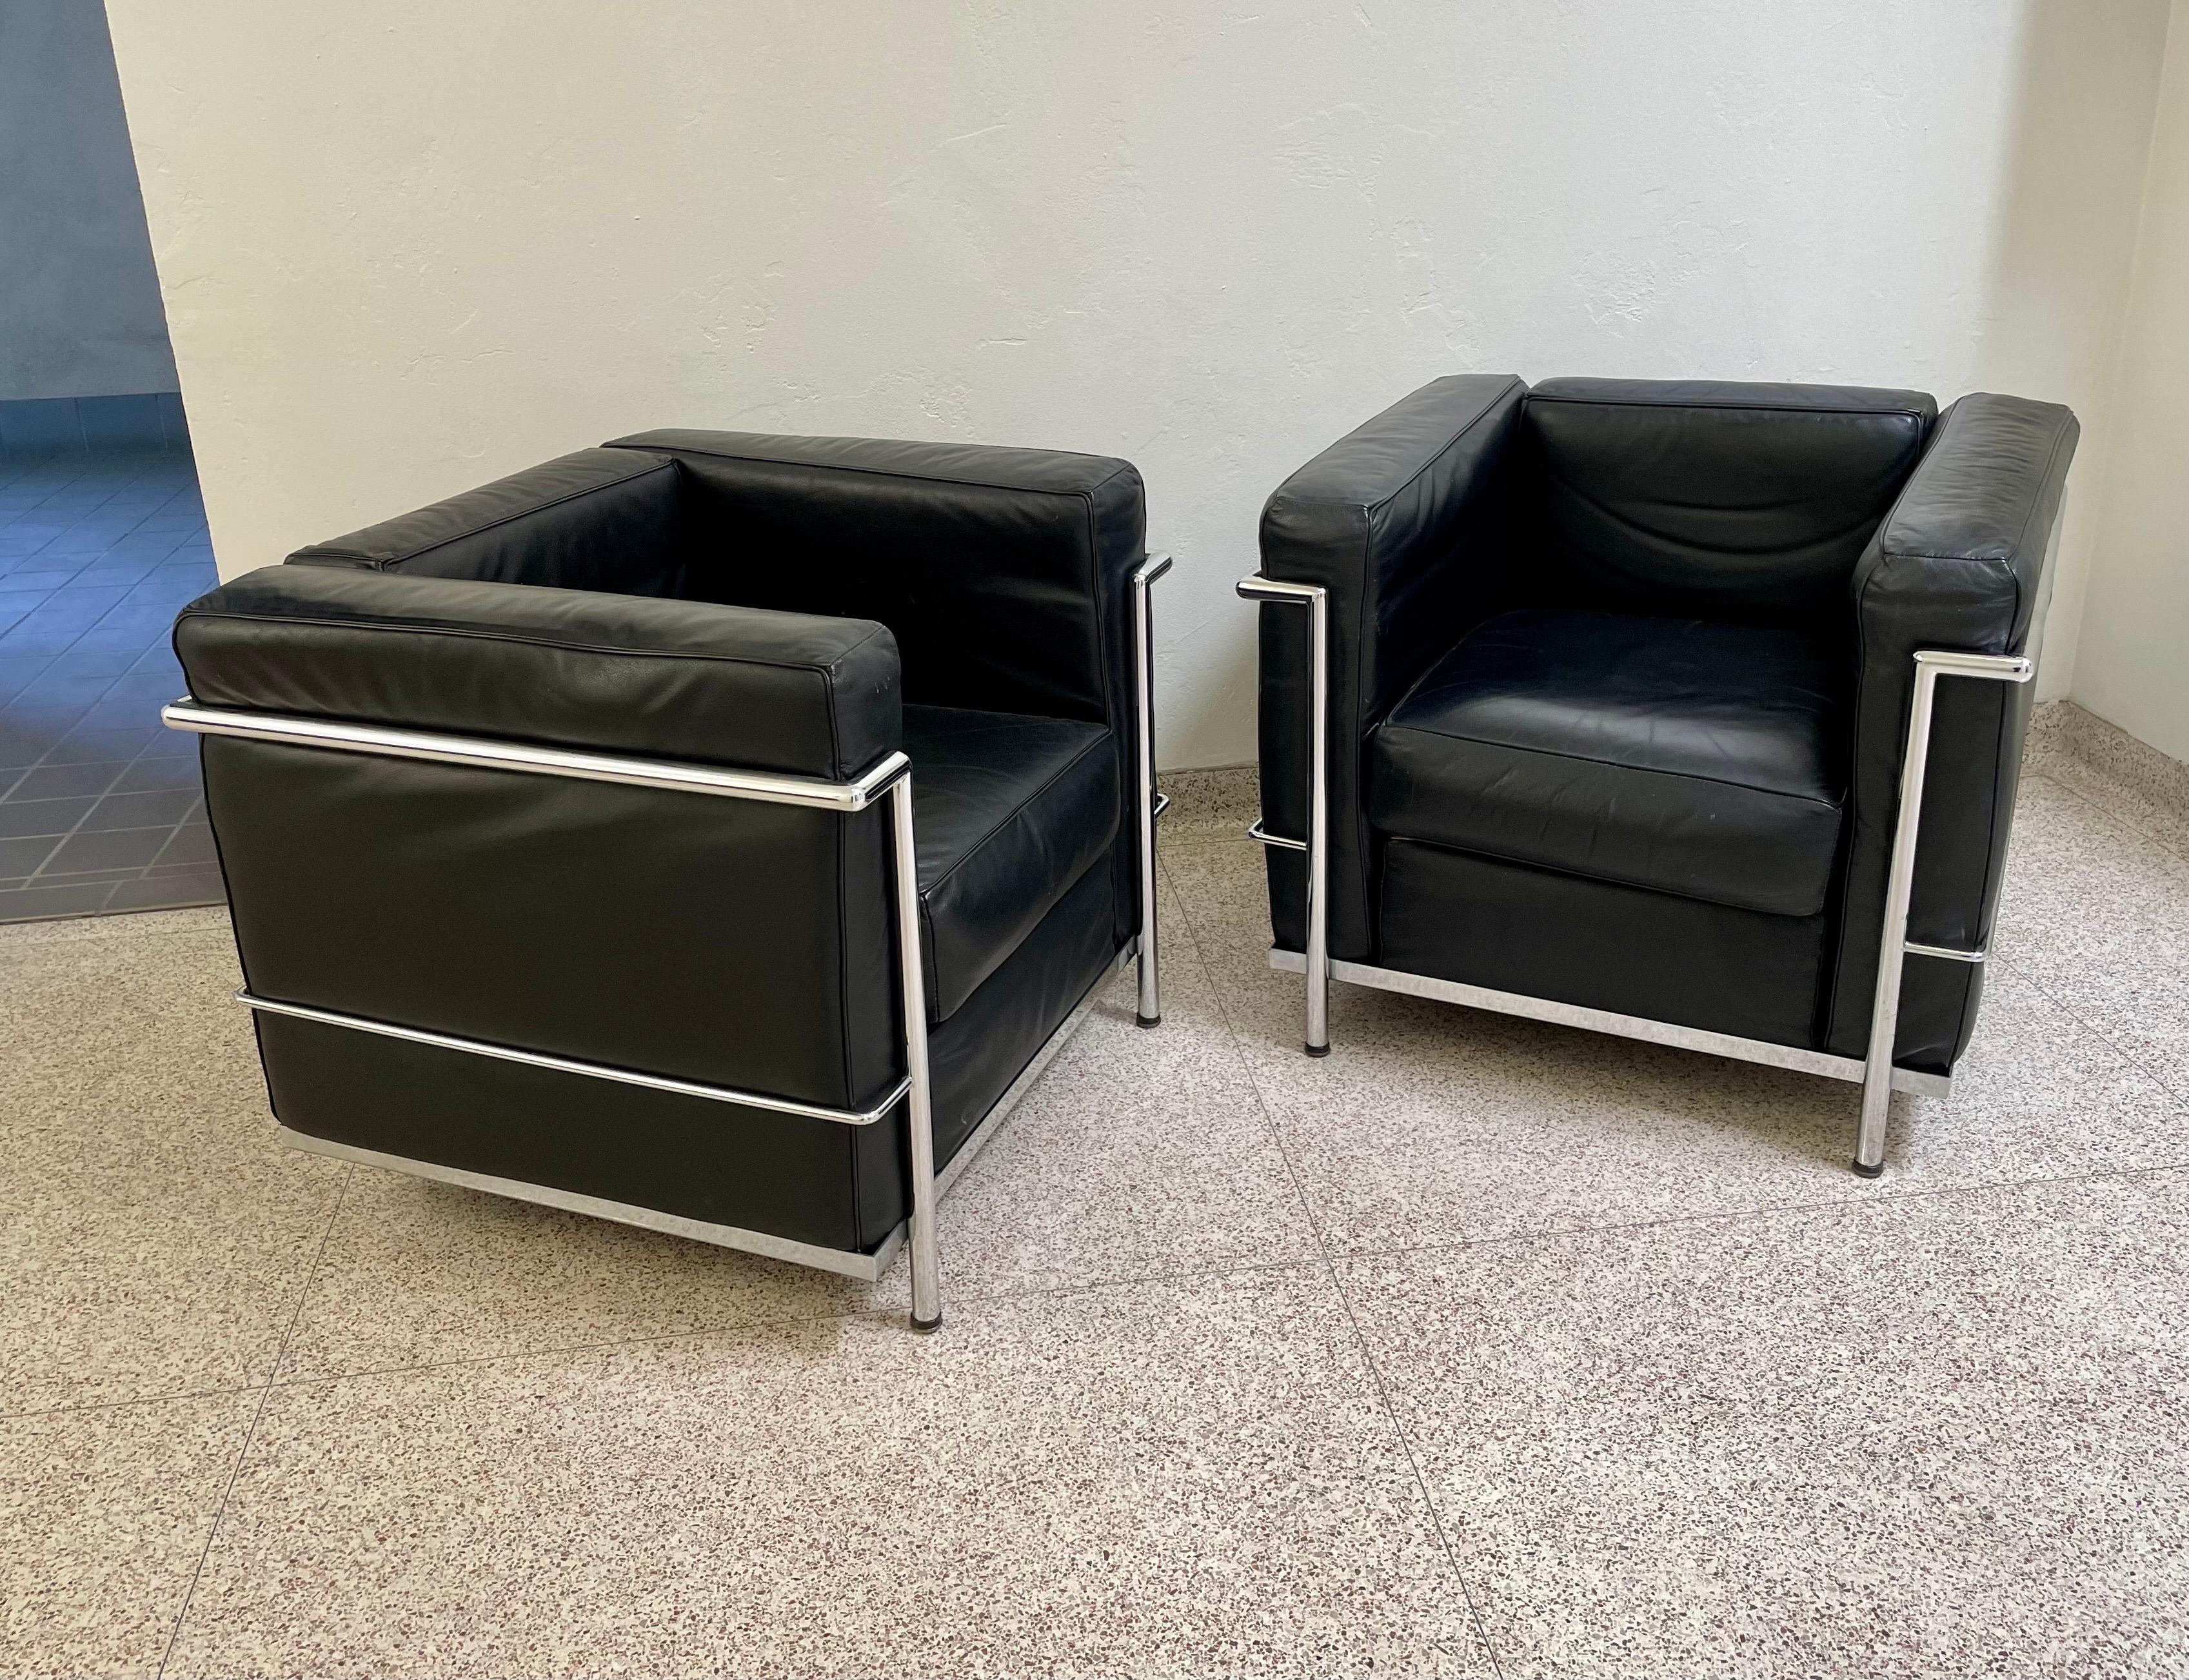 A pair of leather club chairs crafted in the iconic style of Le Corbusier, Pierre Jeanneret, and Charlotte Perriand. Manufactured in Italy by Palazzetti, circa 1970's. They are comprised of a chrome frame, black leather upholstery, and foam